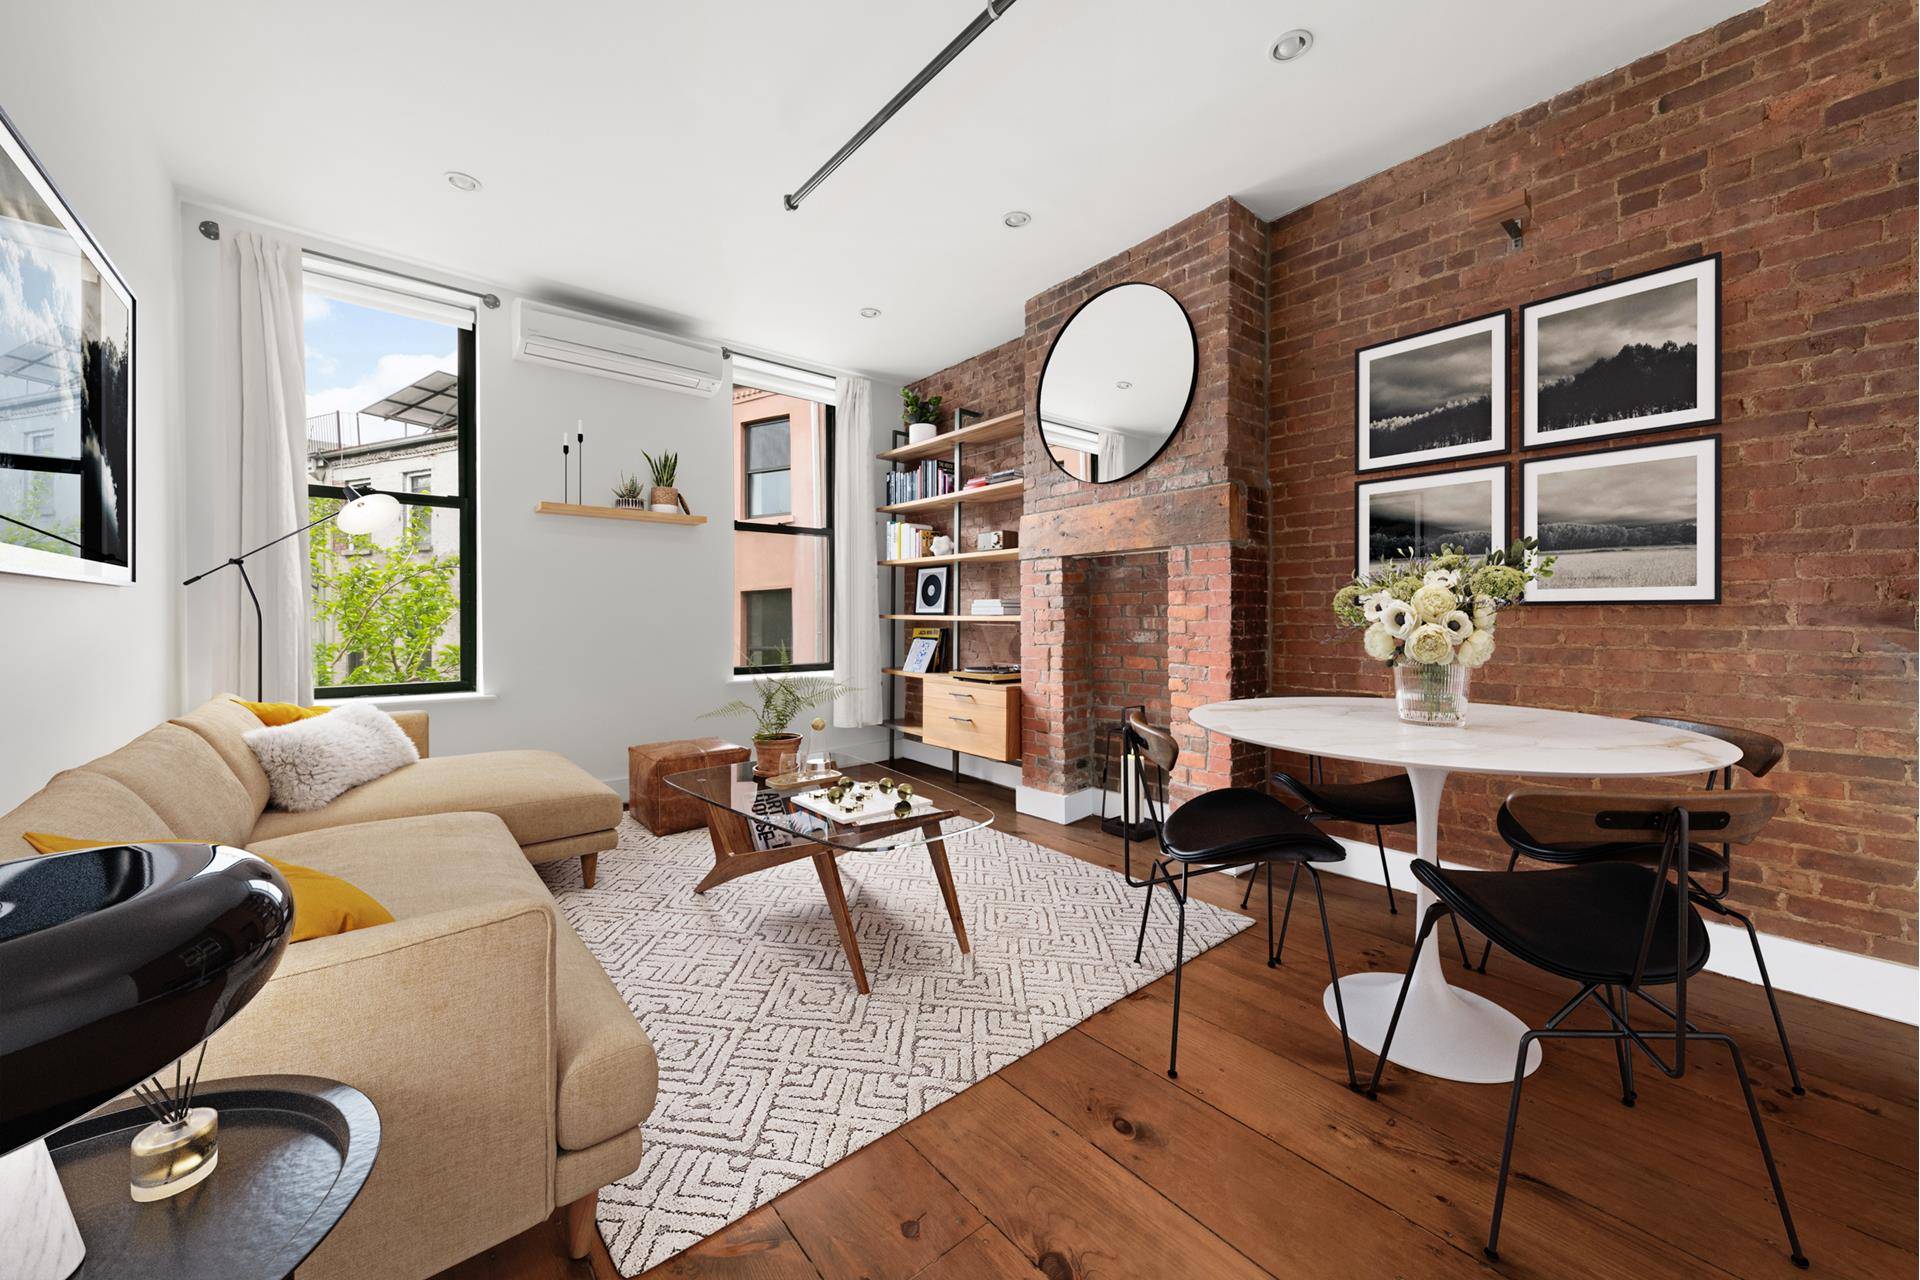 In the heart of Clinton Hill, this charming one bedroom, one bathroom home seamlessly blends the classic loft feel with modern convenience.